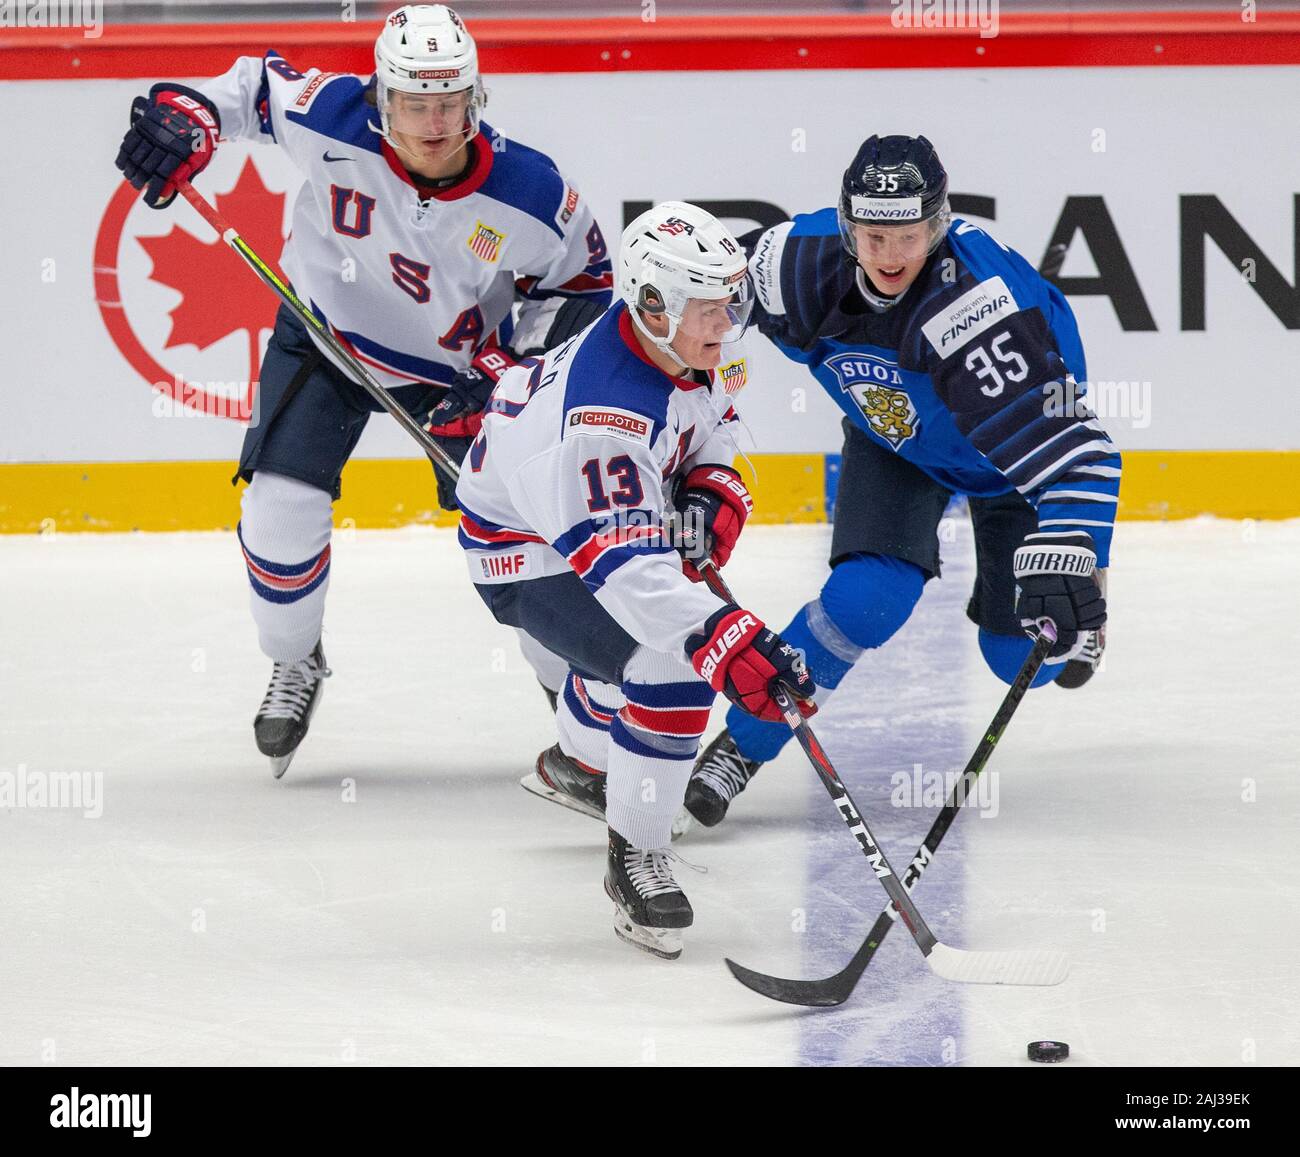 L R Trevor Zegras And Cole Caufield Both Usa And Aku Raty Fin In Action During The 2020 Iihf World Junior Ice Hockey Championships Quarterfinal Match Between Usa And Finland In Trinec Czech